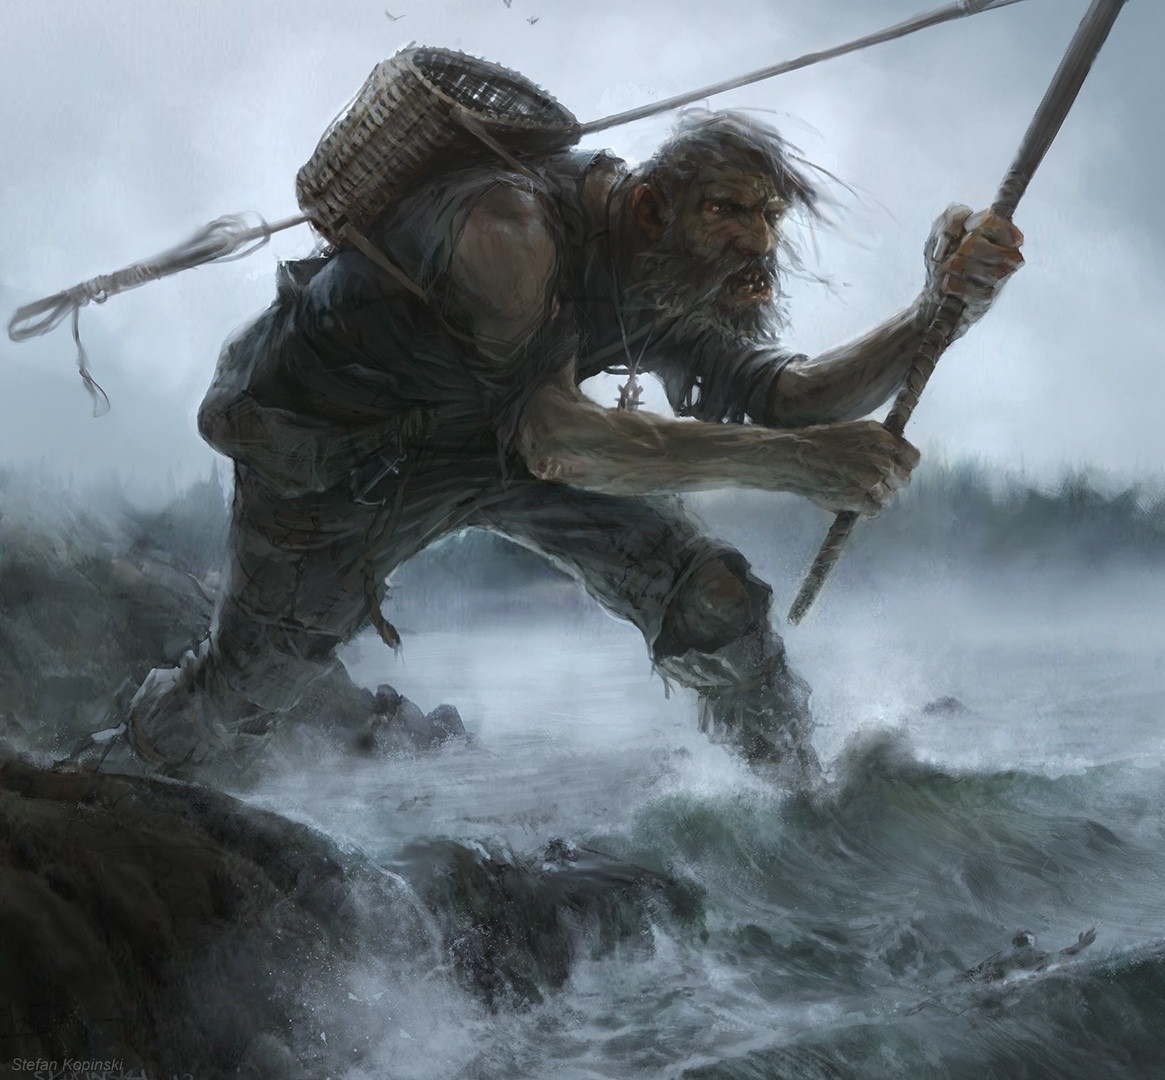 https://static.wikia.nocookie.net/the-old-world/images/6/6b/Giant_fisherman.jpg/revision/latest?cb=20181203100343